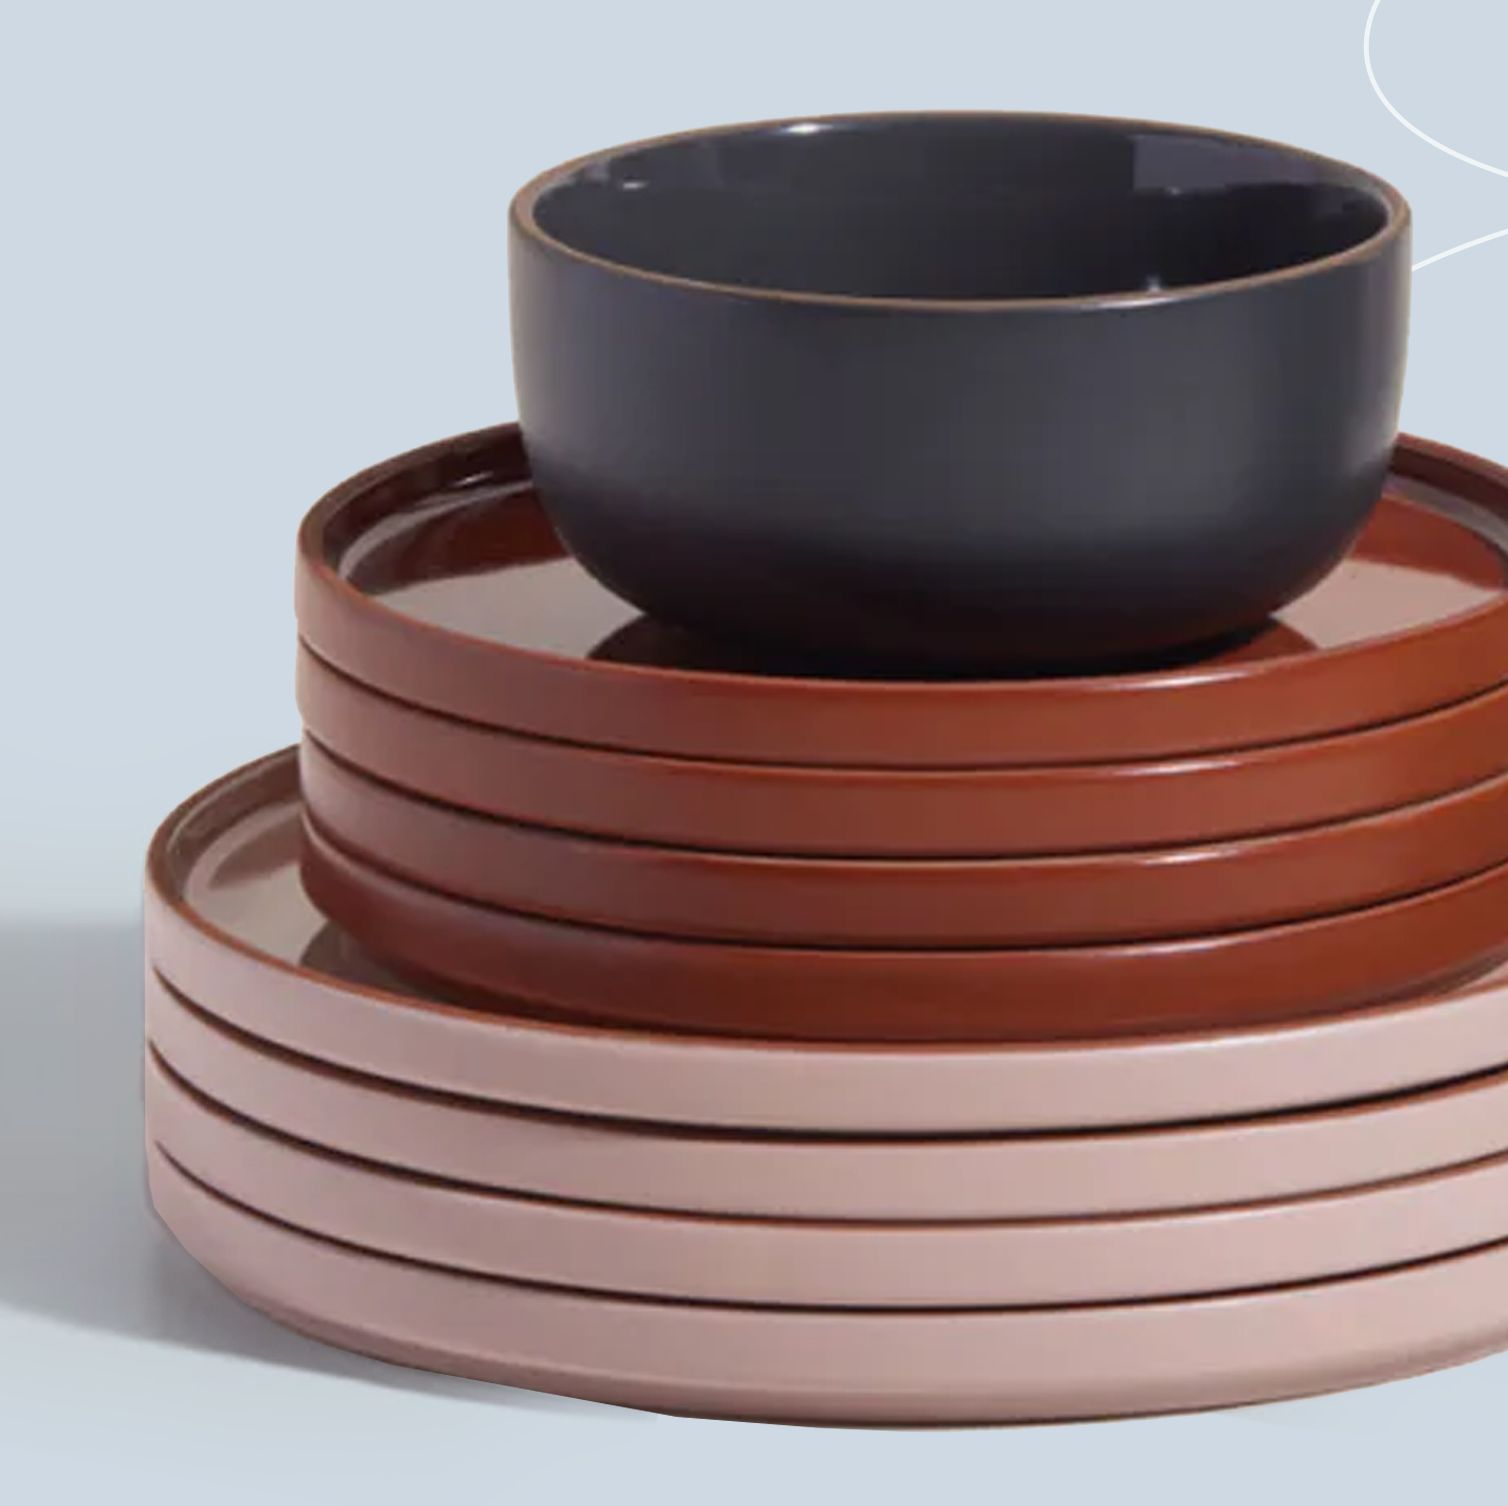 20 Great Dinnerware Sets That Make Upgrading Easy